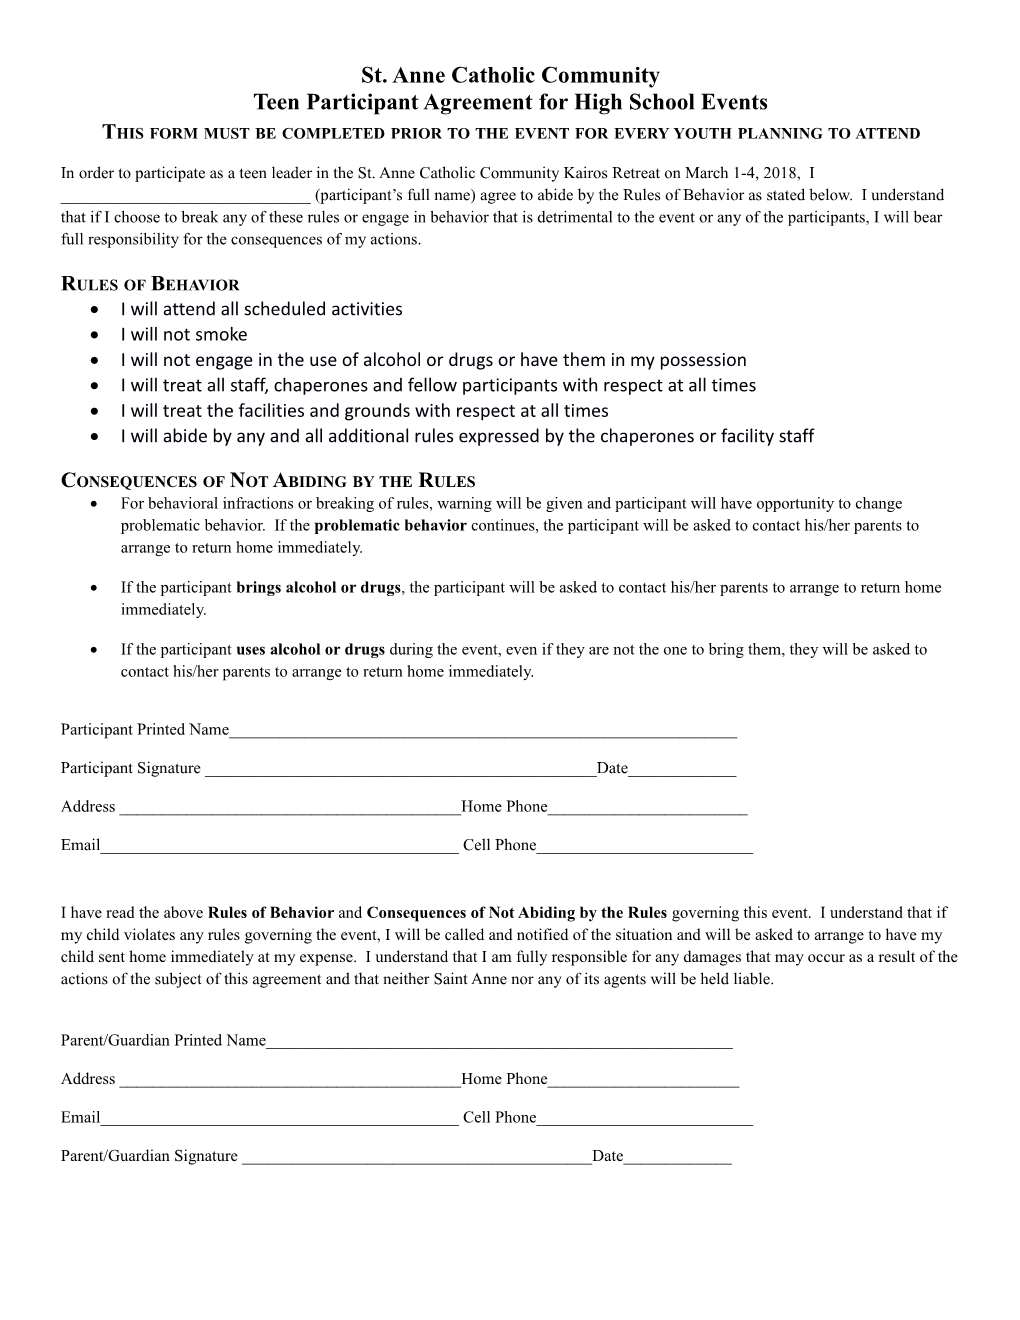 Teen Participant Agreement for High School Events